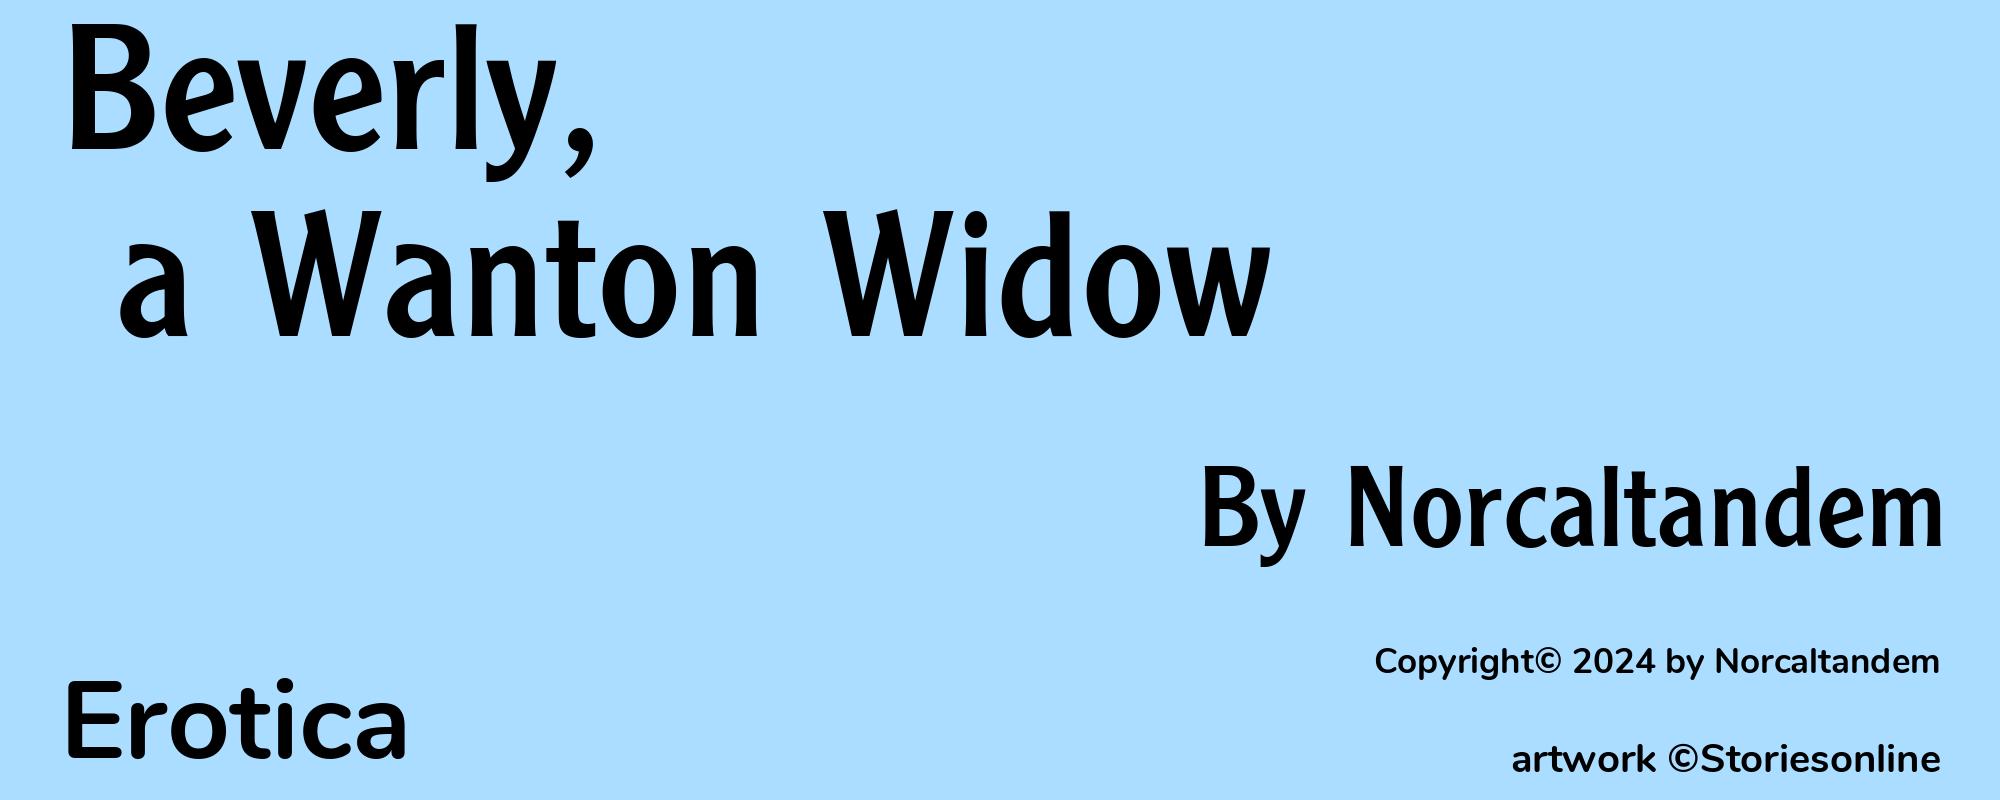 Beverly, a Wanton Widow - Cover